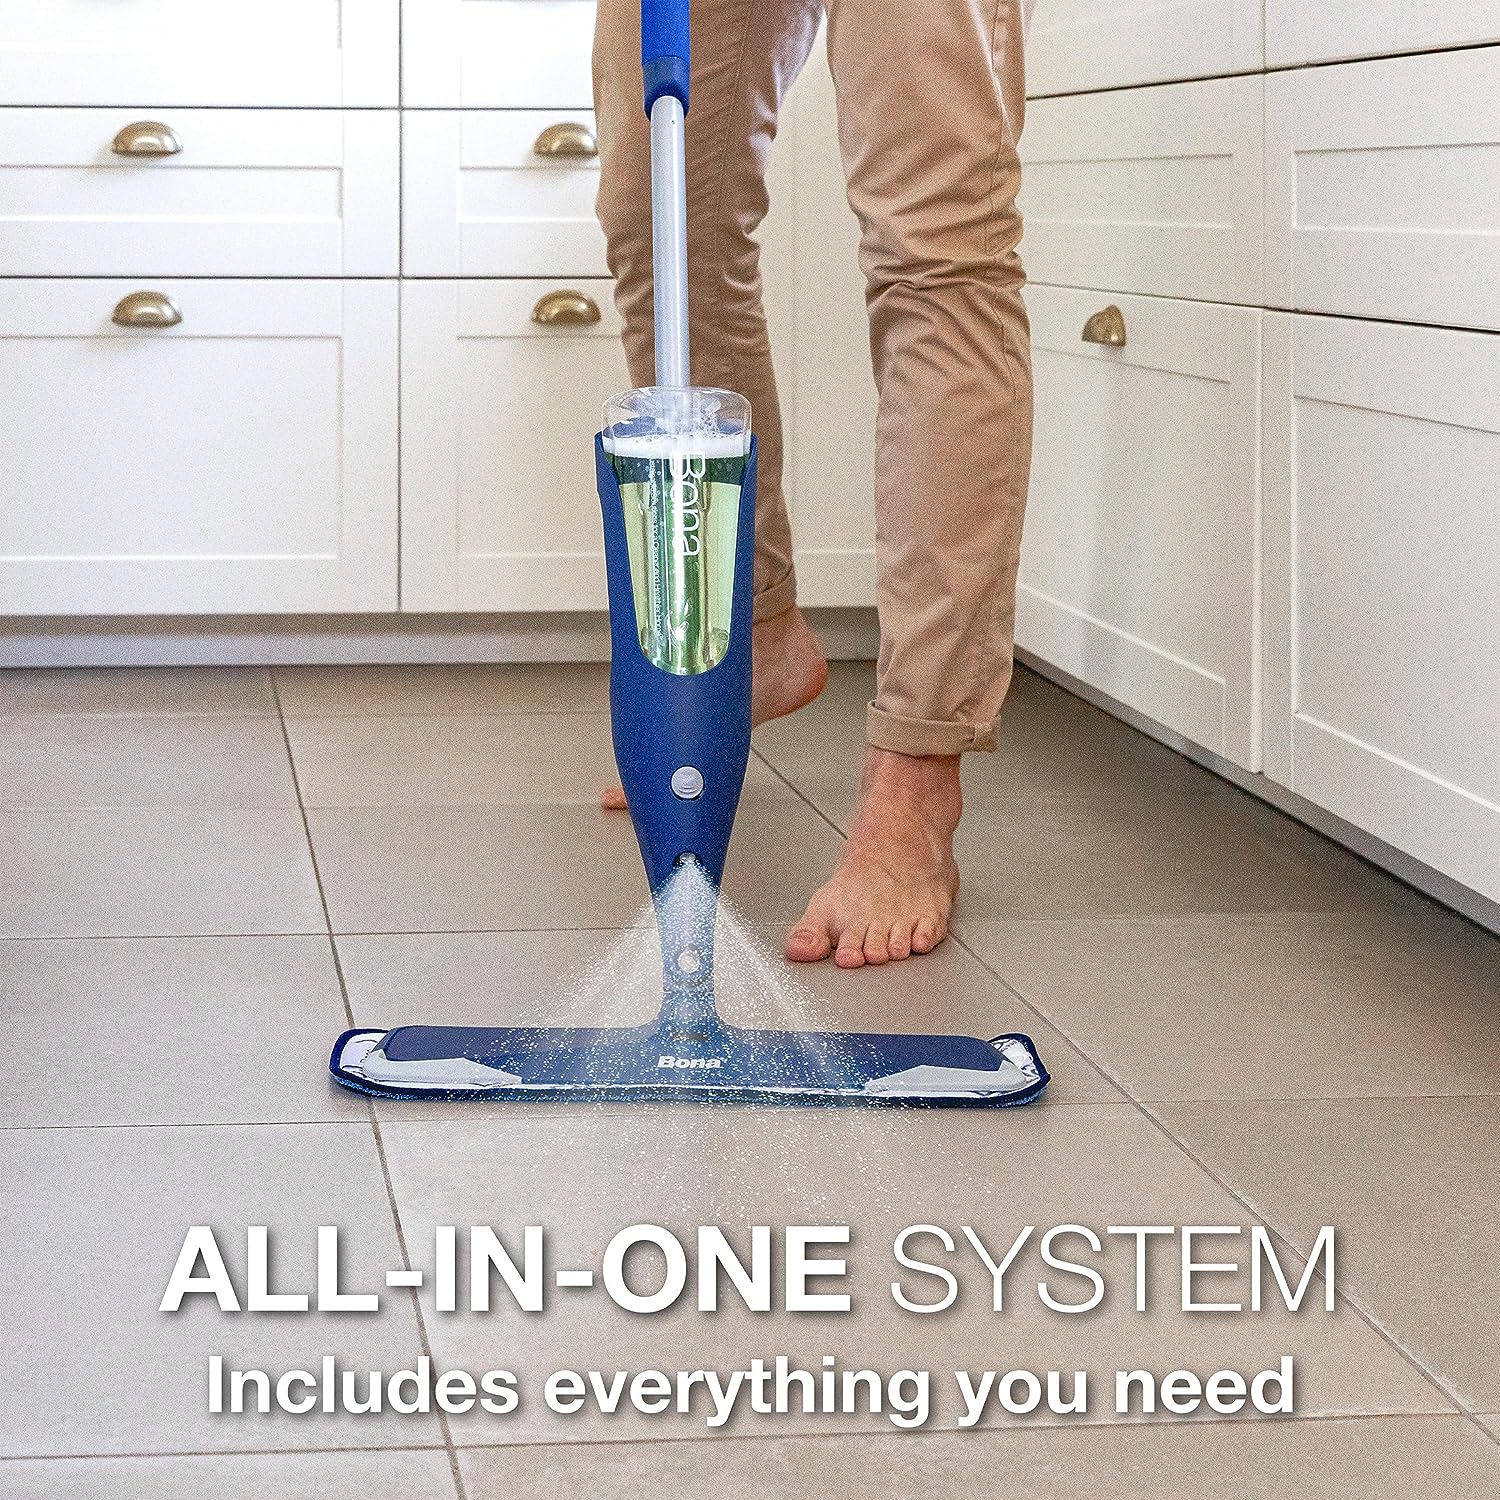 Bona Premium Multi-Surface Floor Spray Mop - Includes Multi-Surface Floor Cleaning Solution 34 fl oz and Machine Washable Microfiber Cleaning Pad - for Stone, Tile, Laminate, and Vinyl Floors : Health & Household